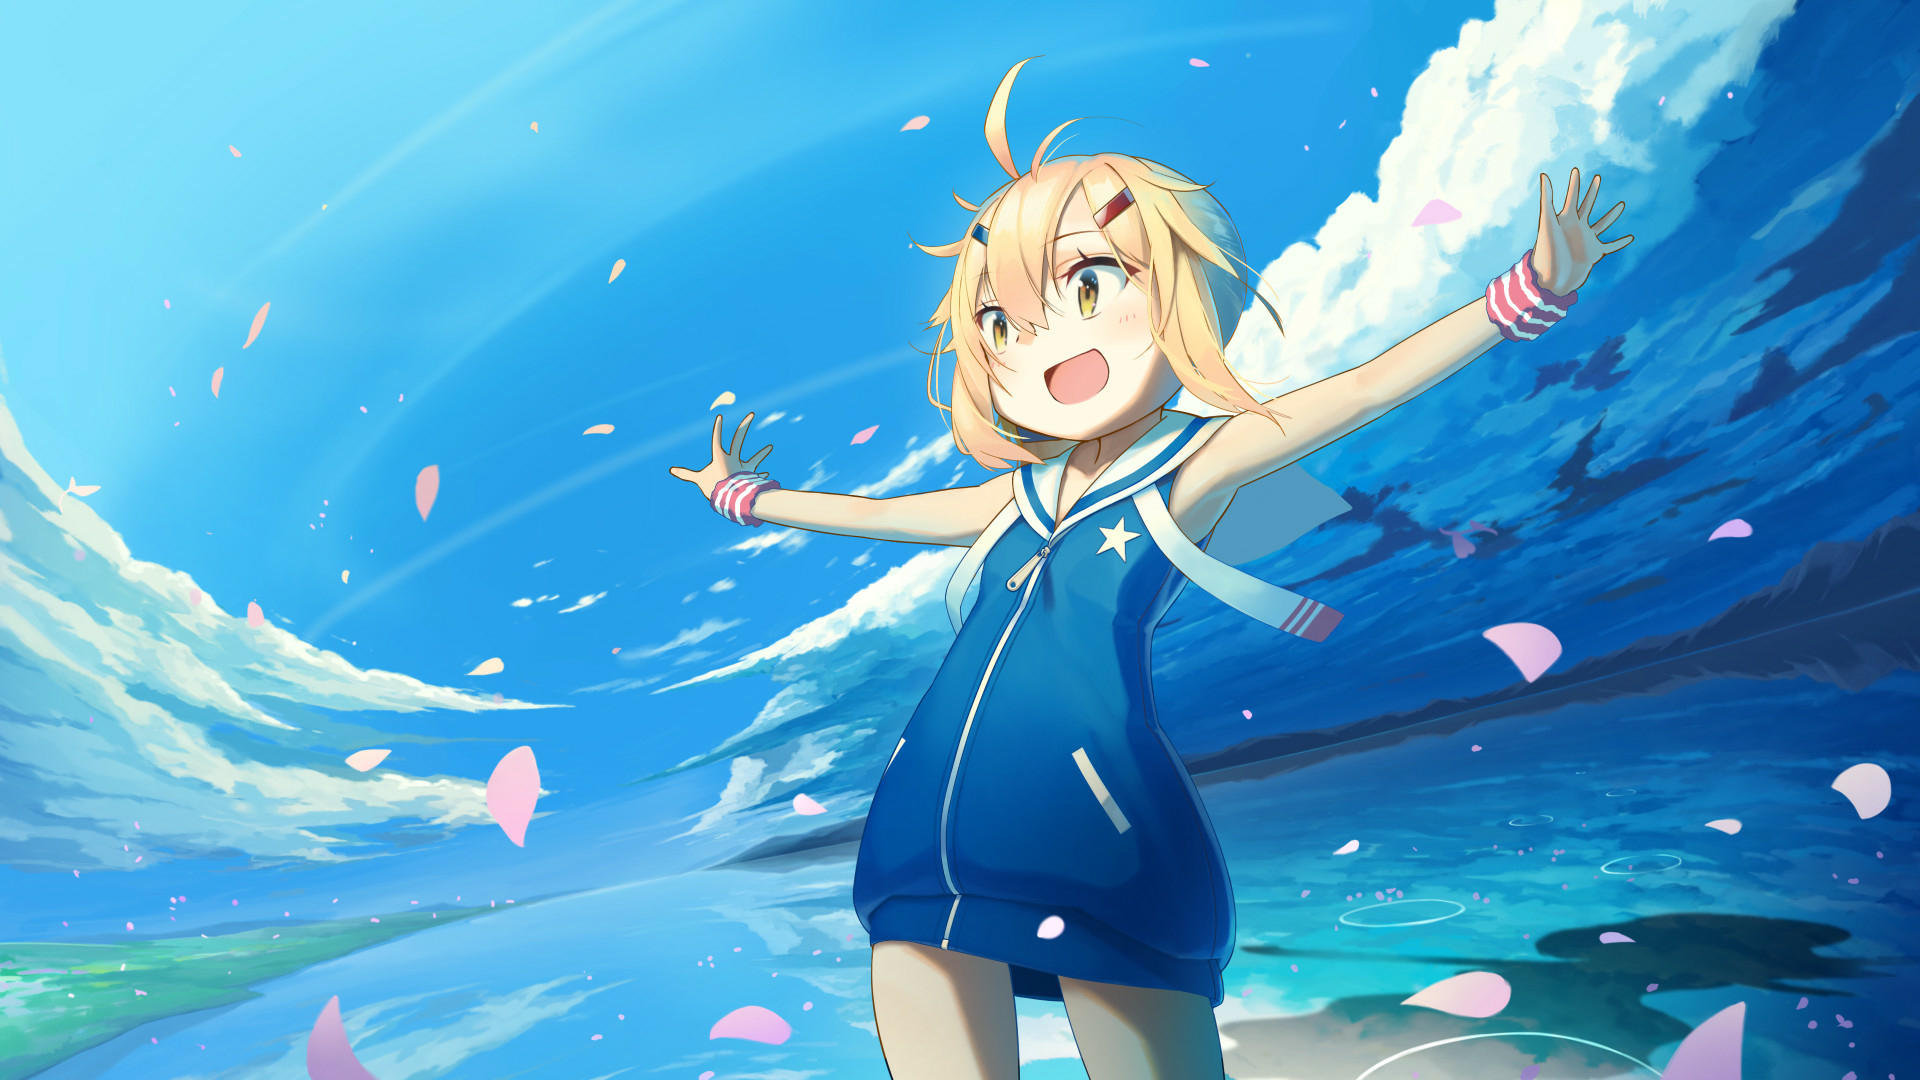 A girl in blue standing on the beach - Blue anime